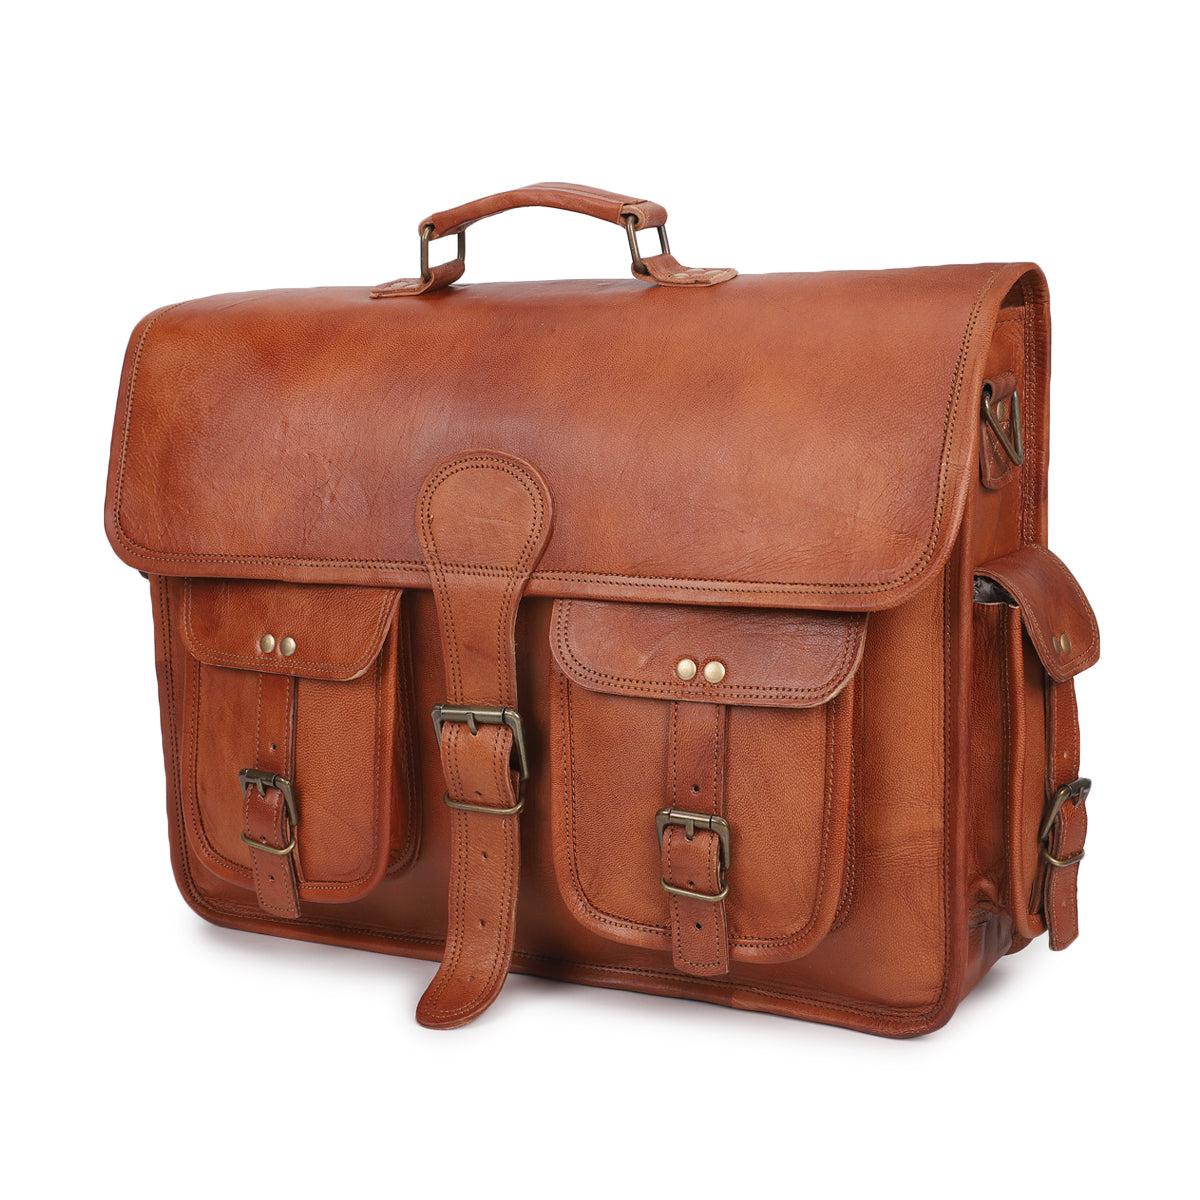 classic leather messenger bag with stylish look